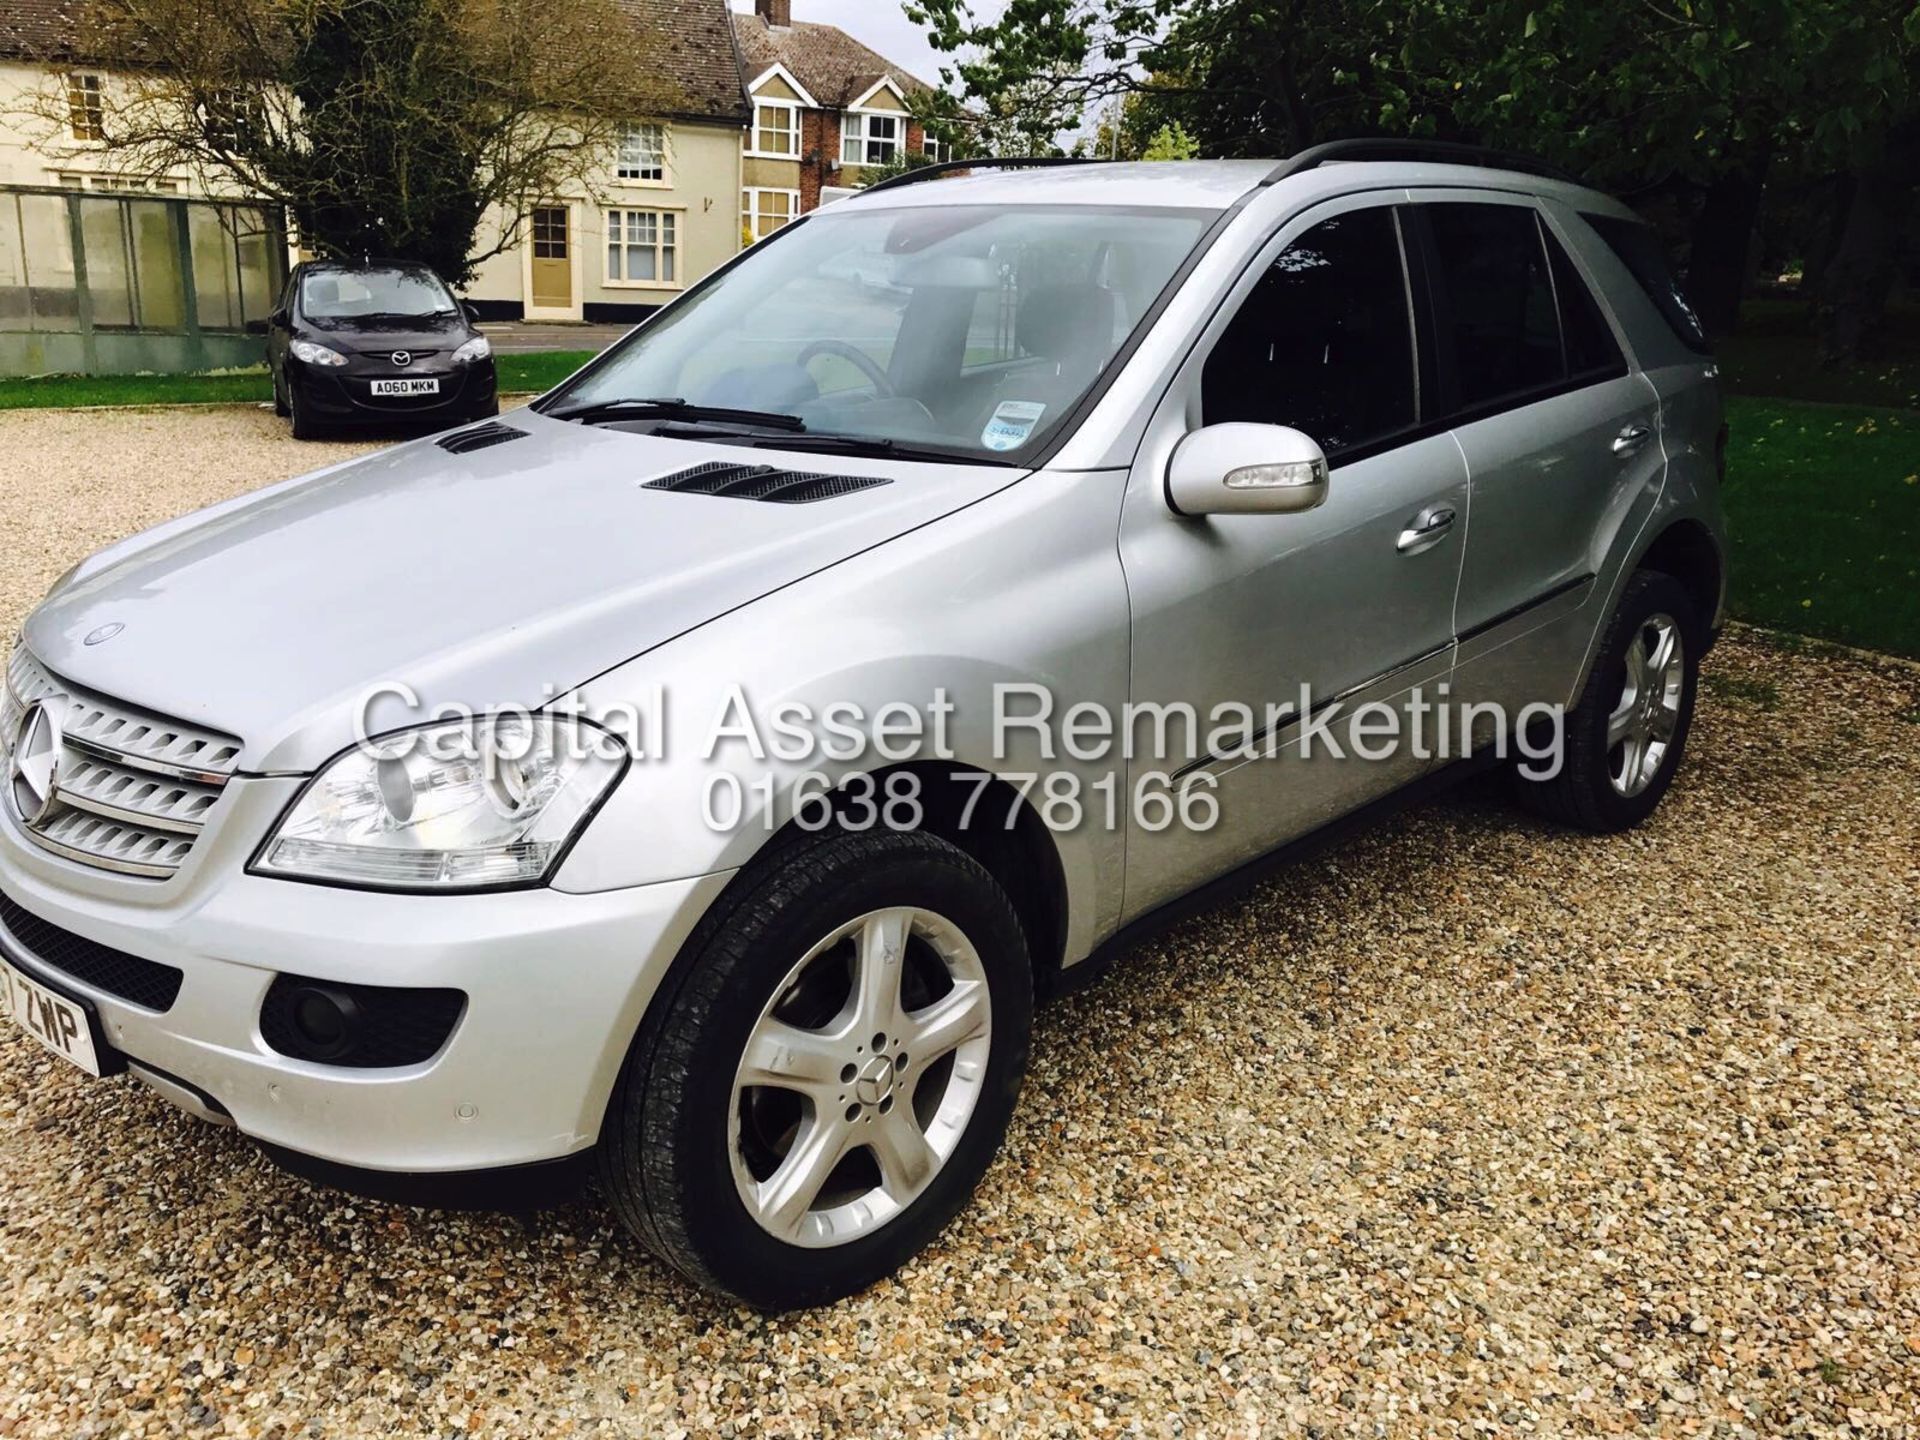 MERCEDES ML280CDI "EDITION S" AUTO 4MATIC (2008MODEL) 1 PREVIOUS OWNER FSH (NO VAT TO PAY ON HAMMER)